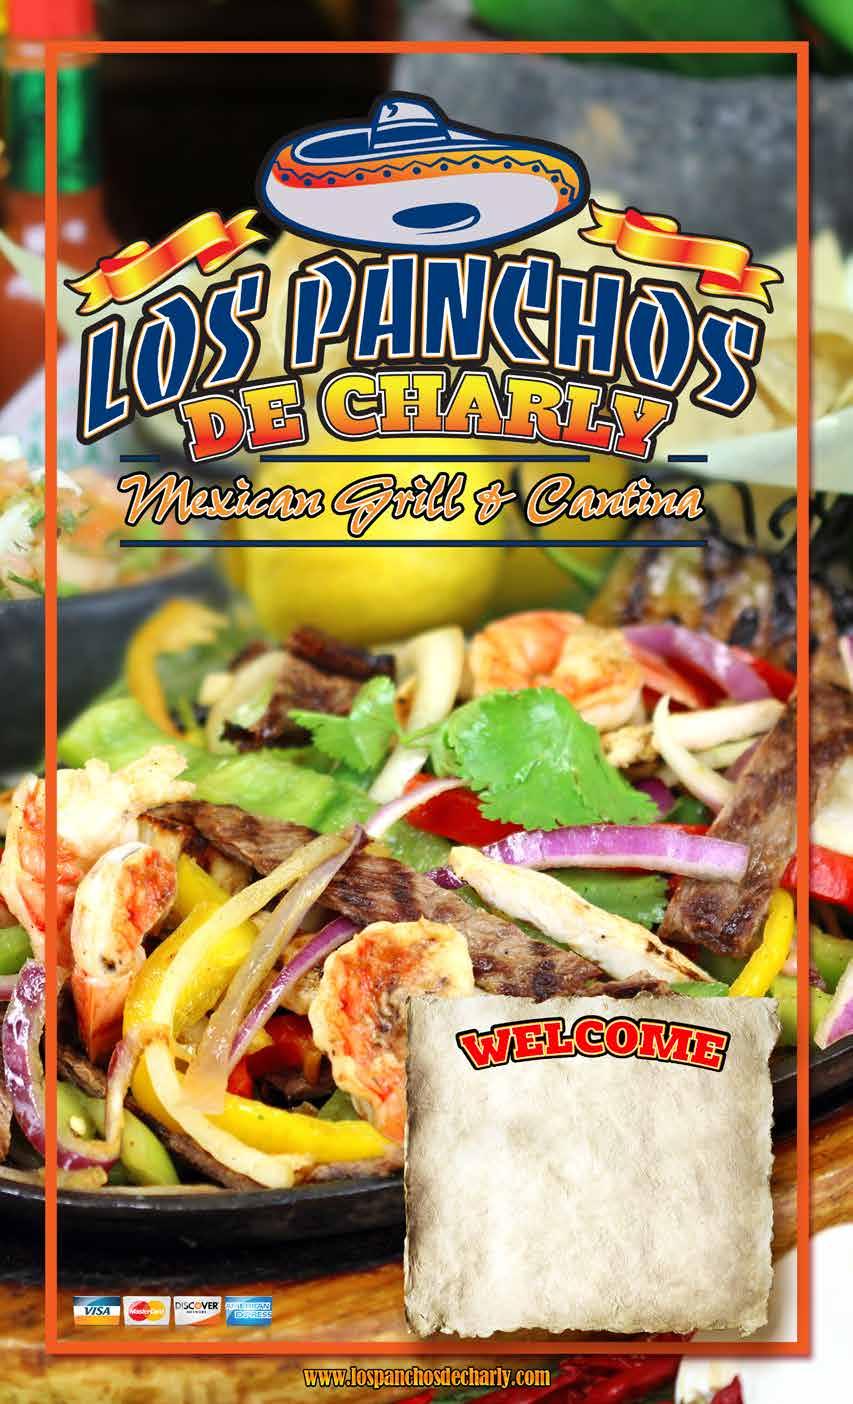 Welcome to Los Panchos de Charly Mexican Grill & Cantina. Having been established in the San Diego Area for more than 40 years as, Los Panchos Taco Shops.